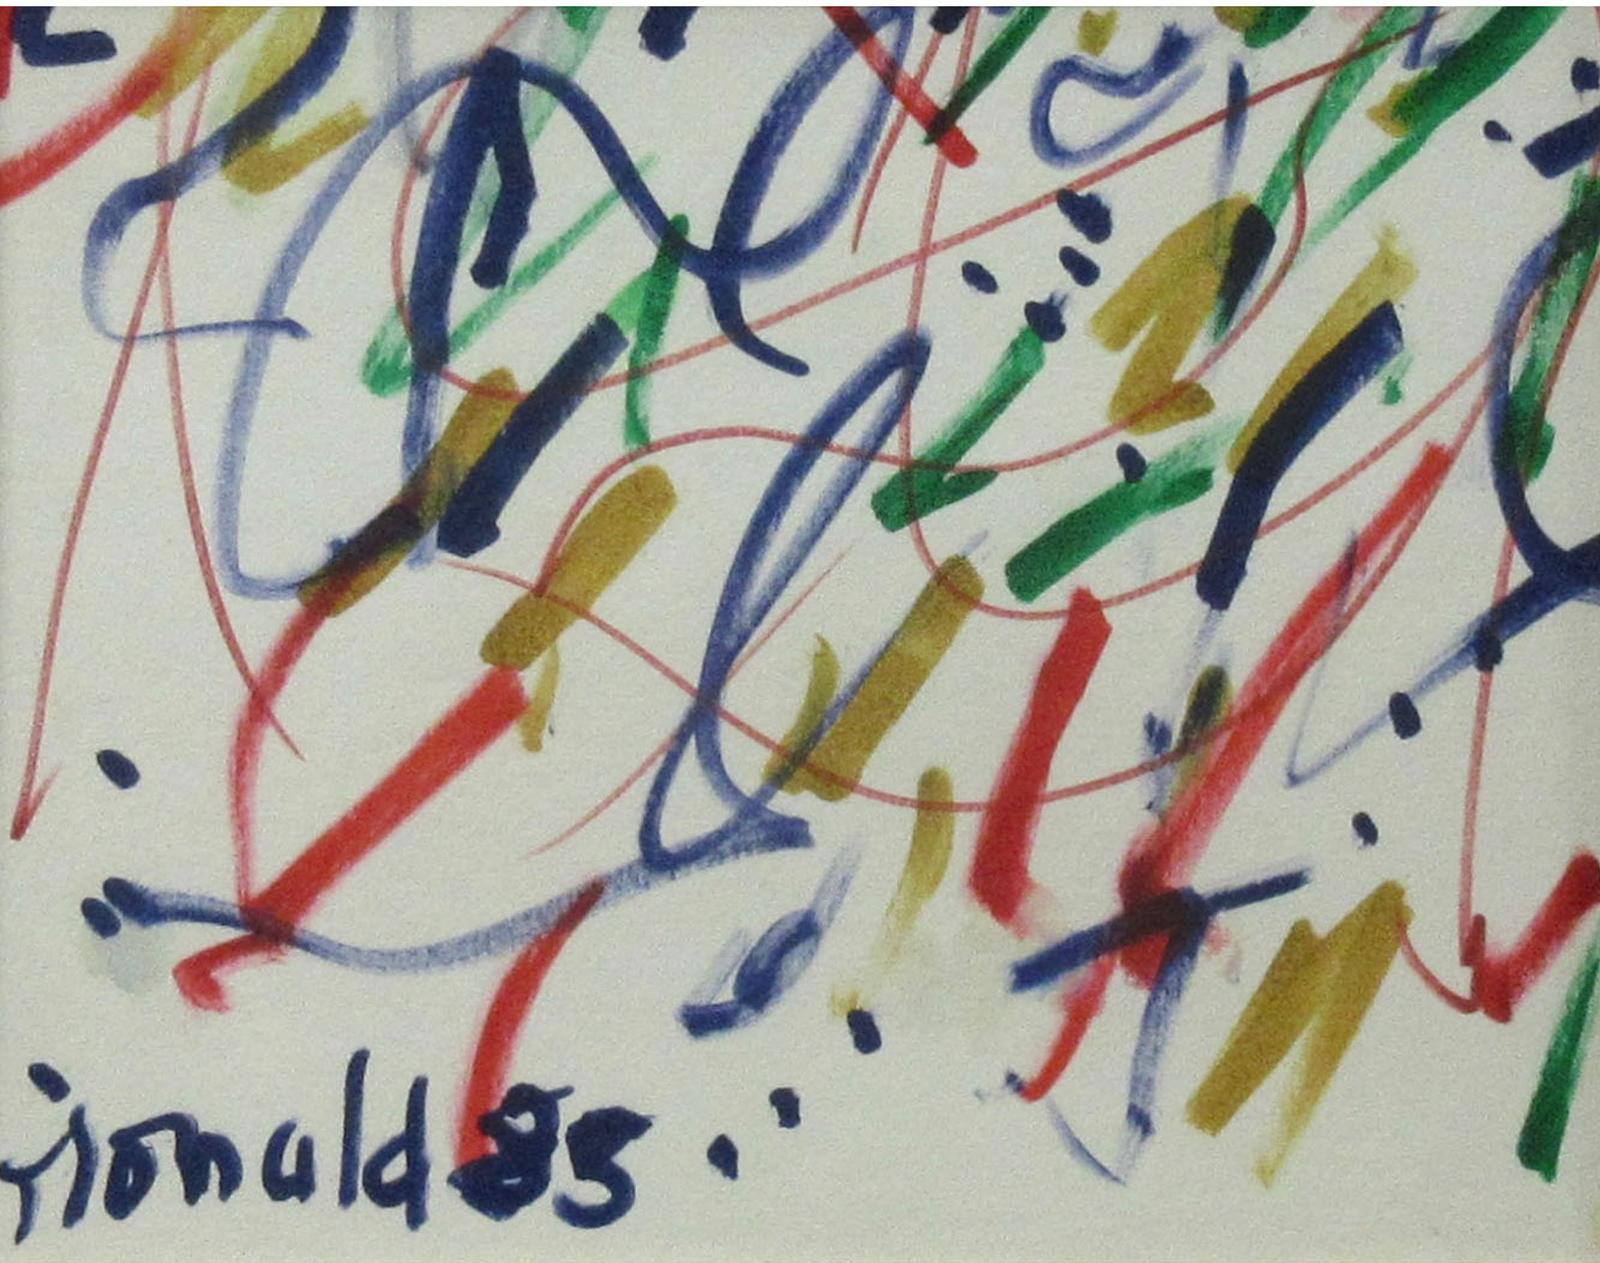 Willam Smith Ronald (1926-1998) - Untitled (Scribble)